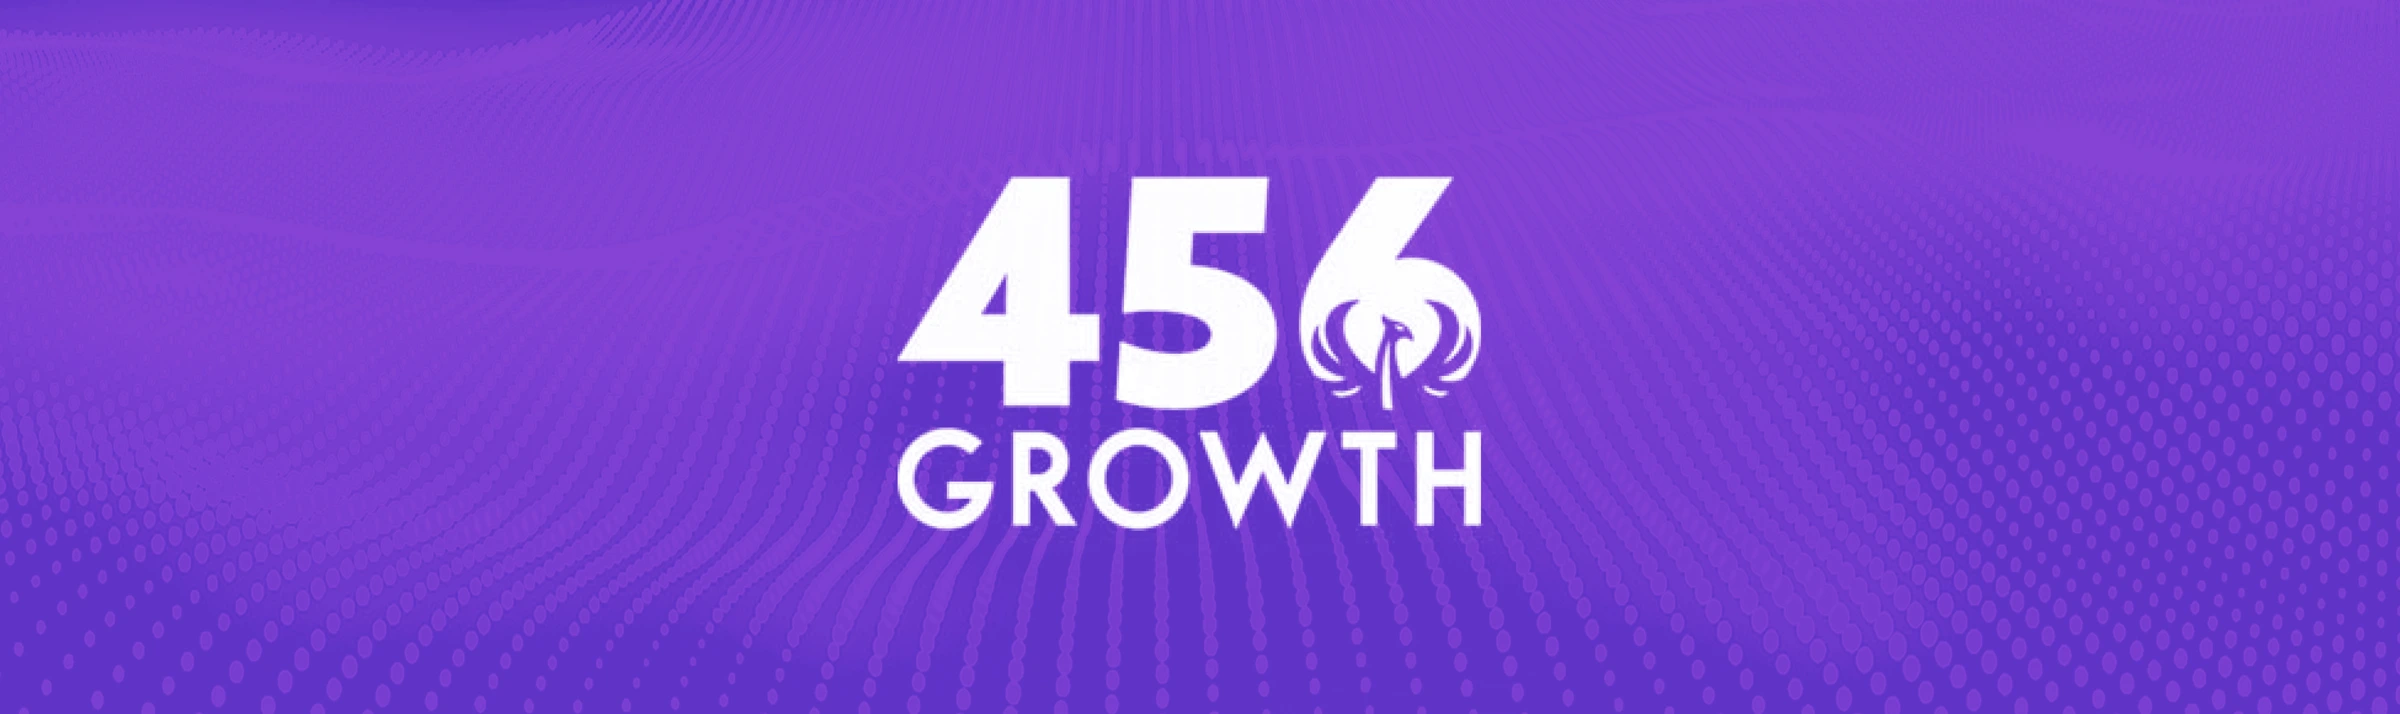 456 Growth Reduced Research Time by 50% with Charm’s CRM Integration